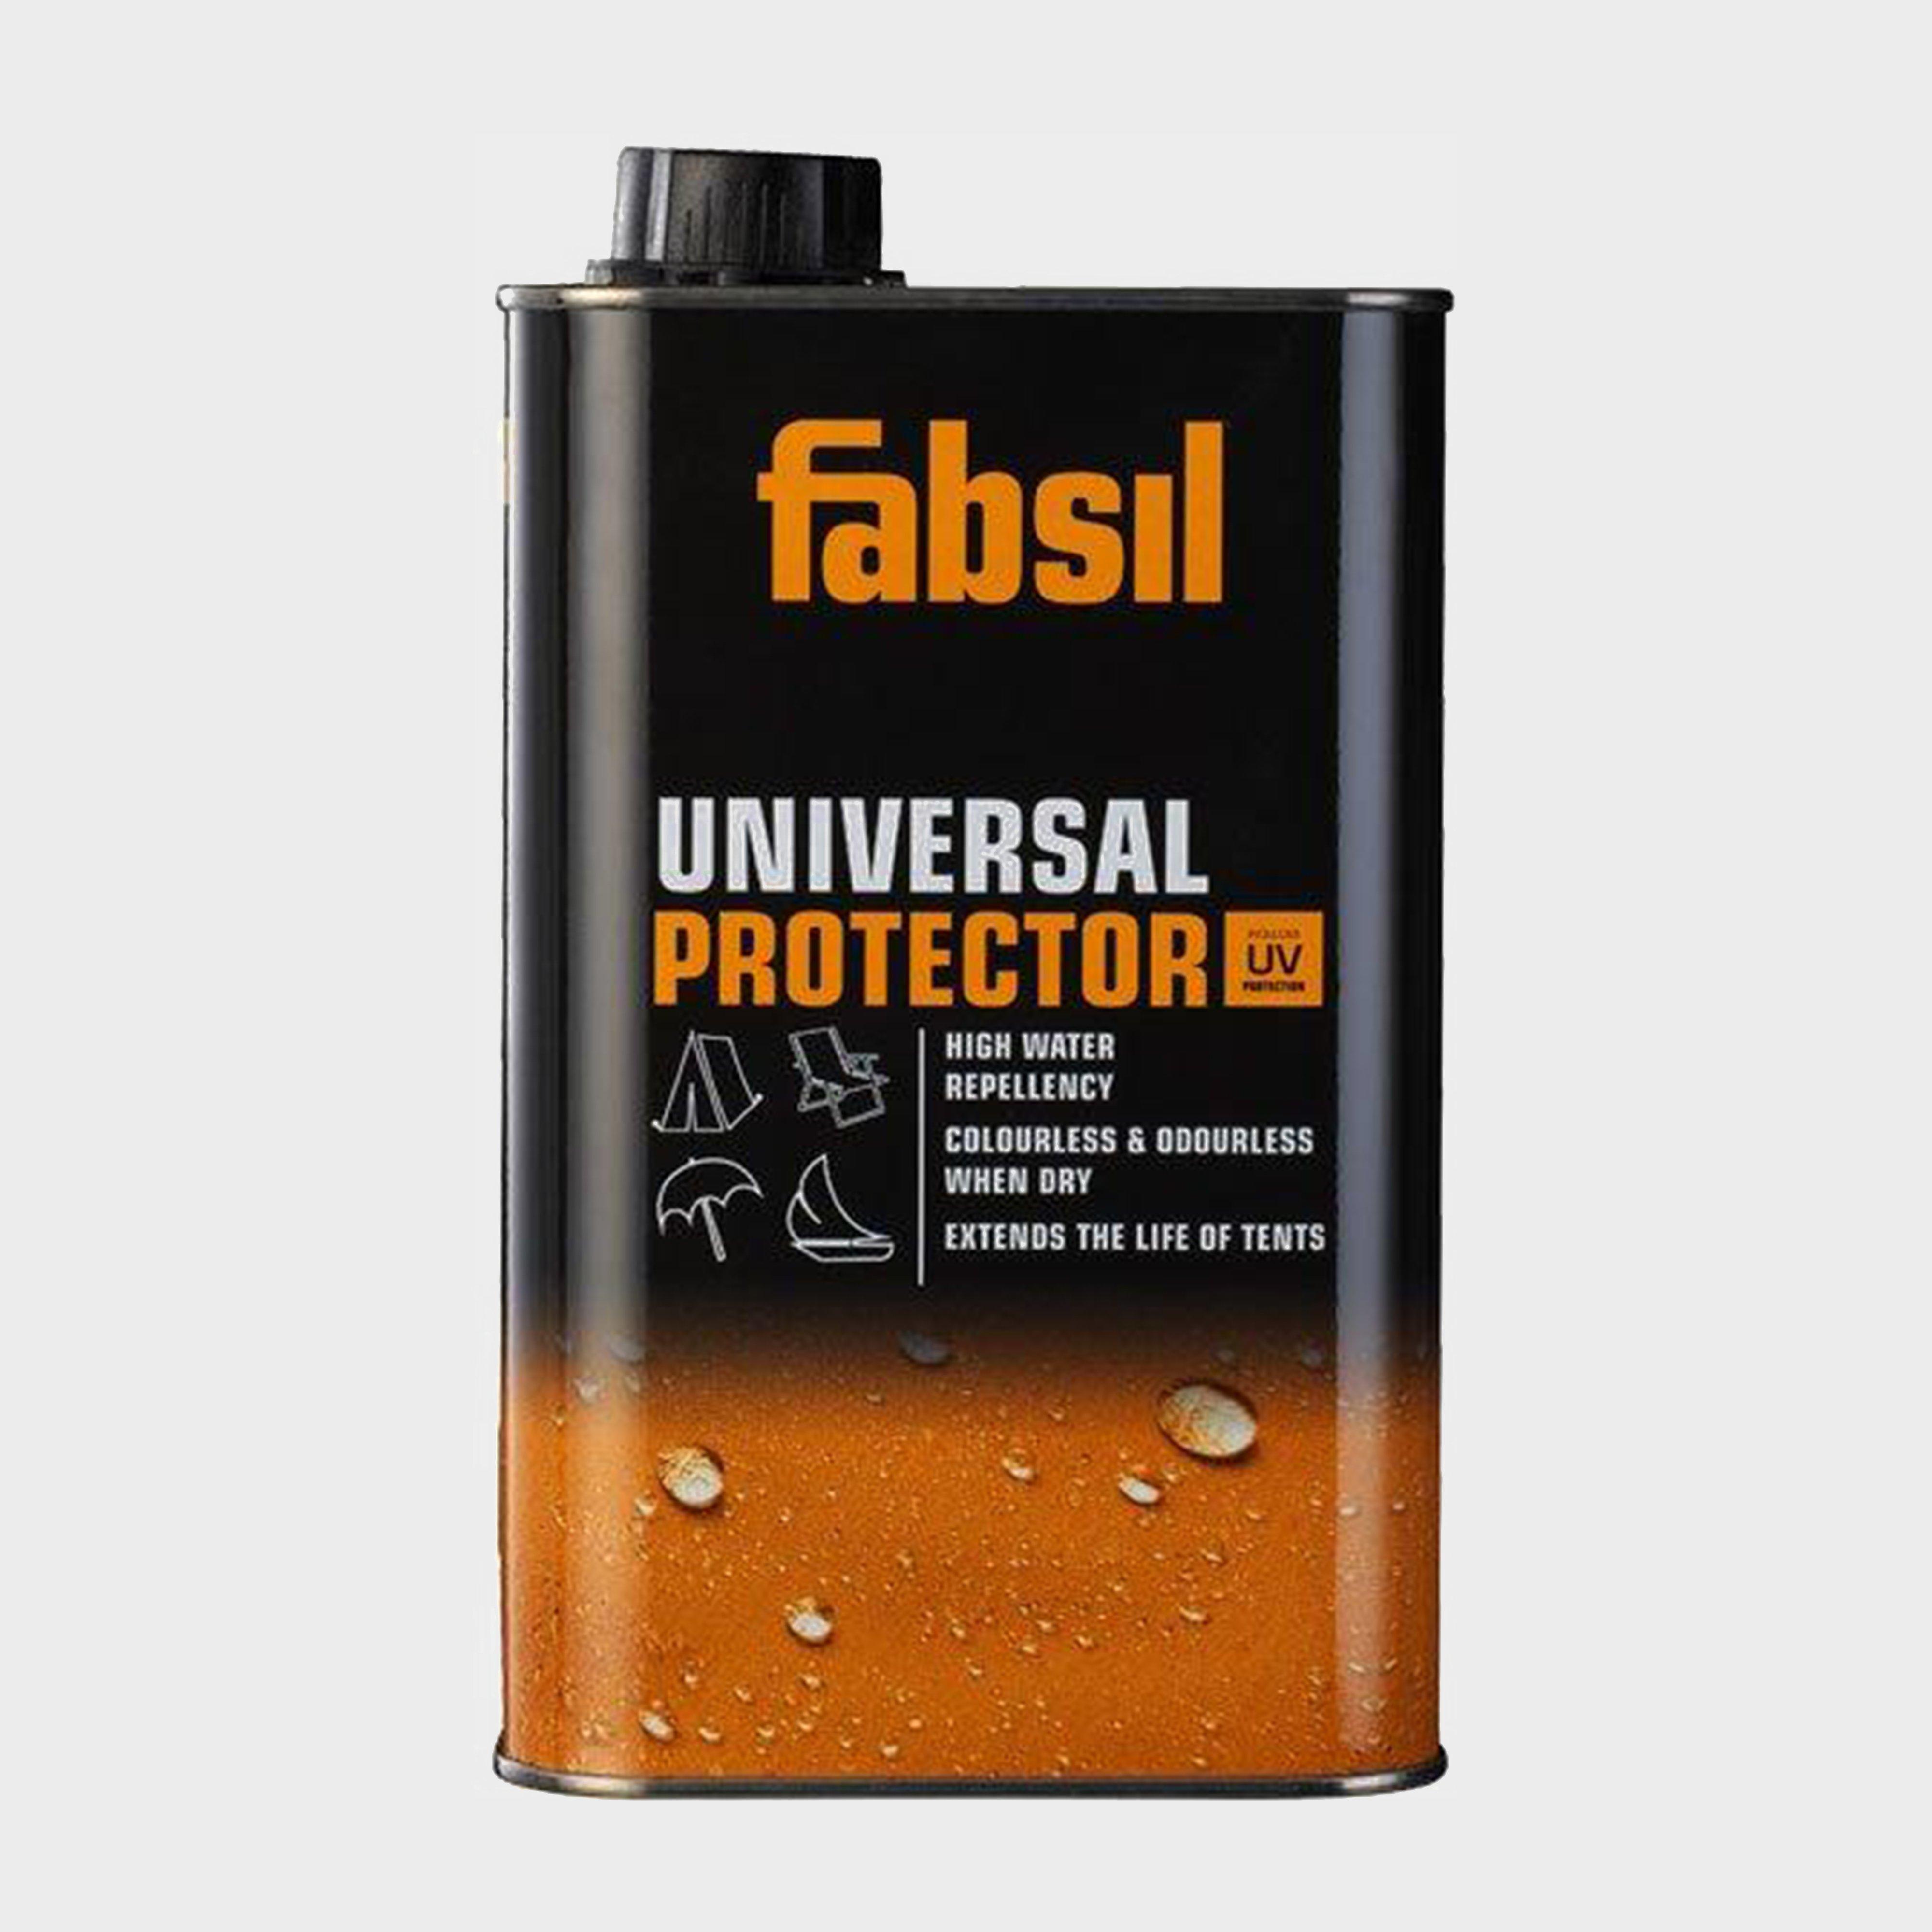 Grangers Fabsil Gold Universal Protector (1 litre) Review